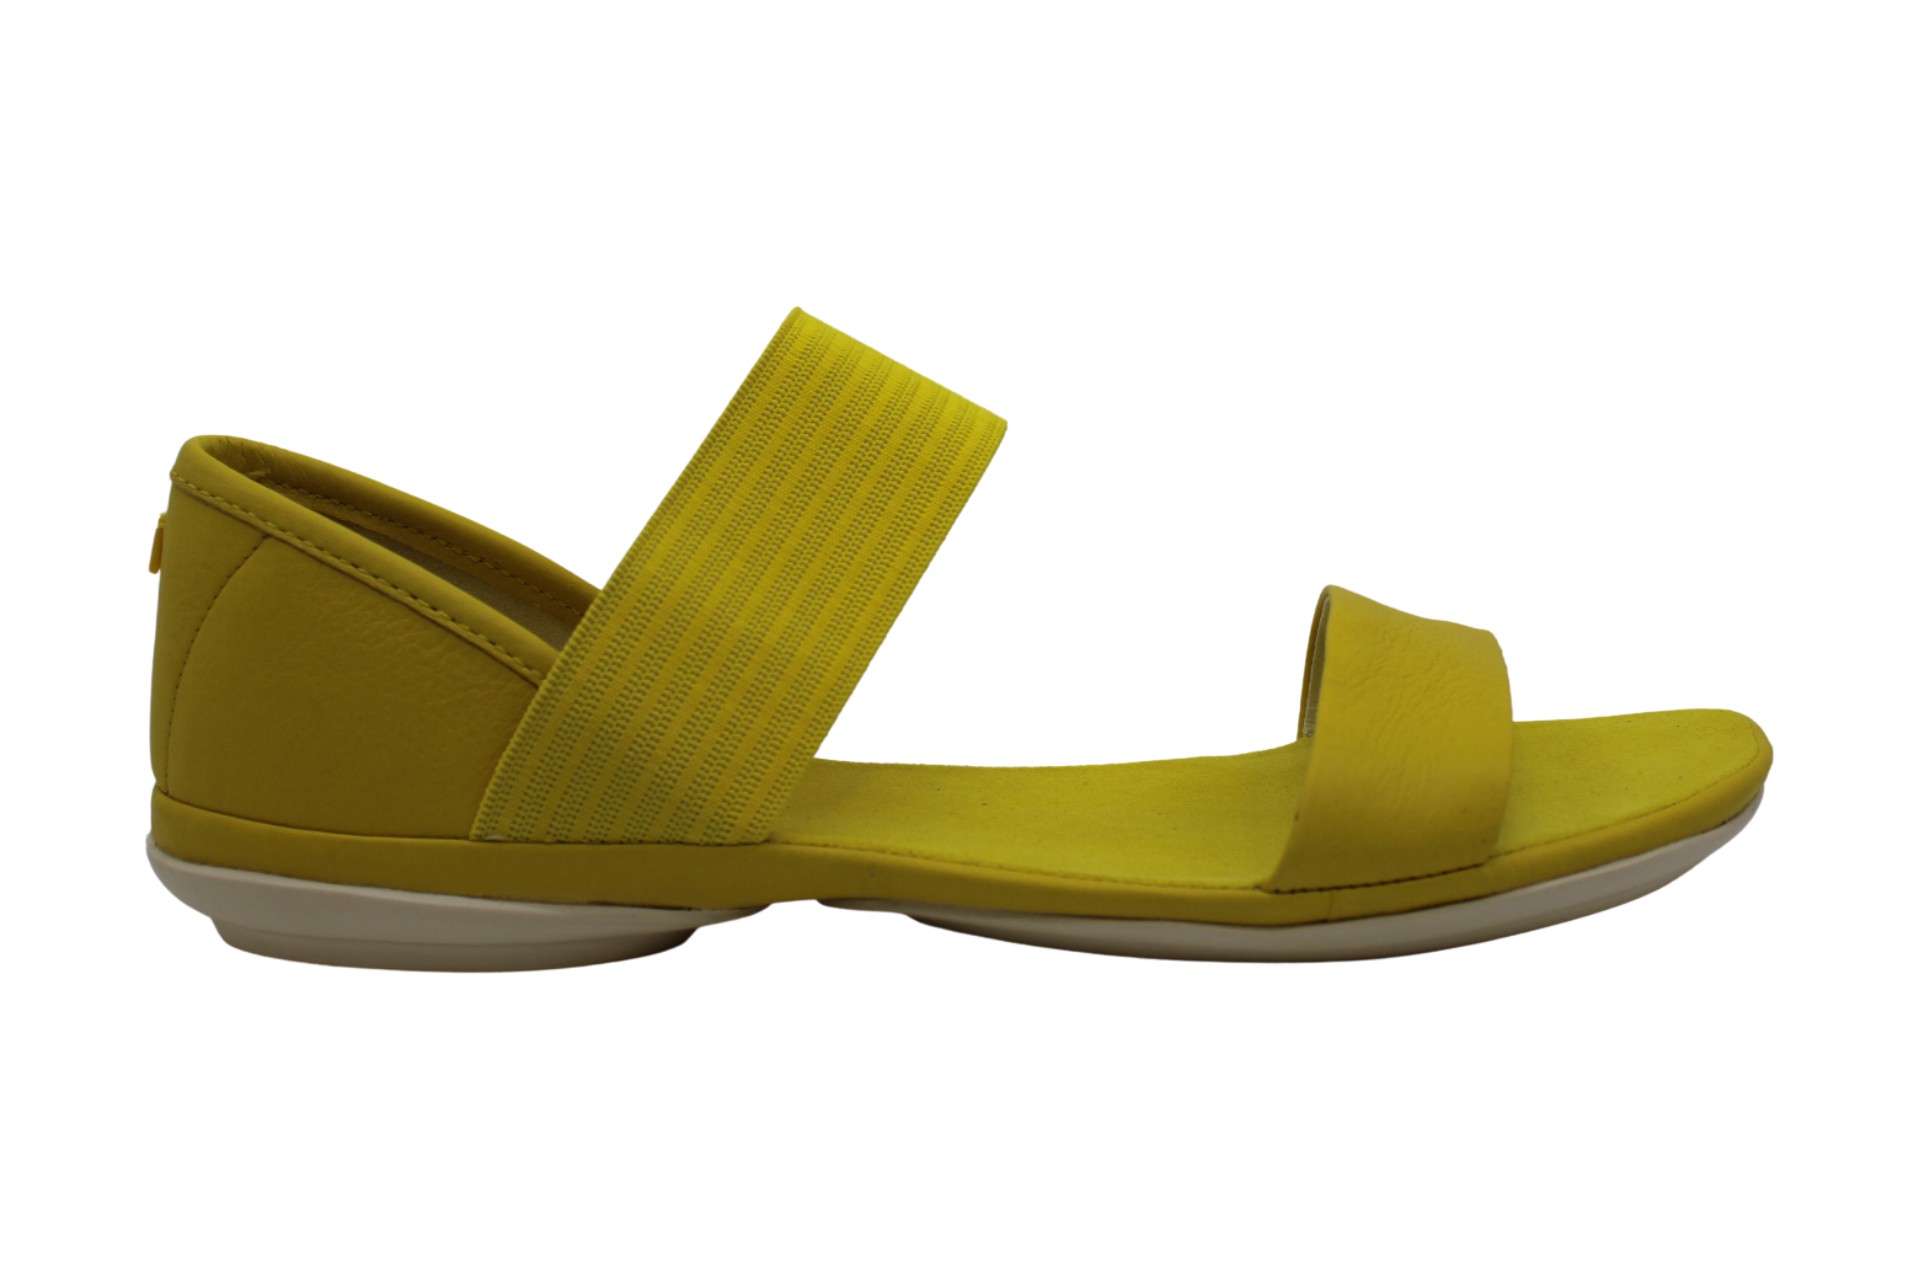 Camper Womens Flat Sandals in Yellow Color, Size 10 BBN | eBay